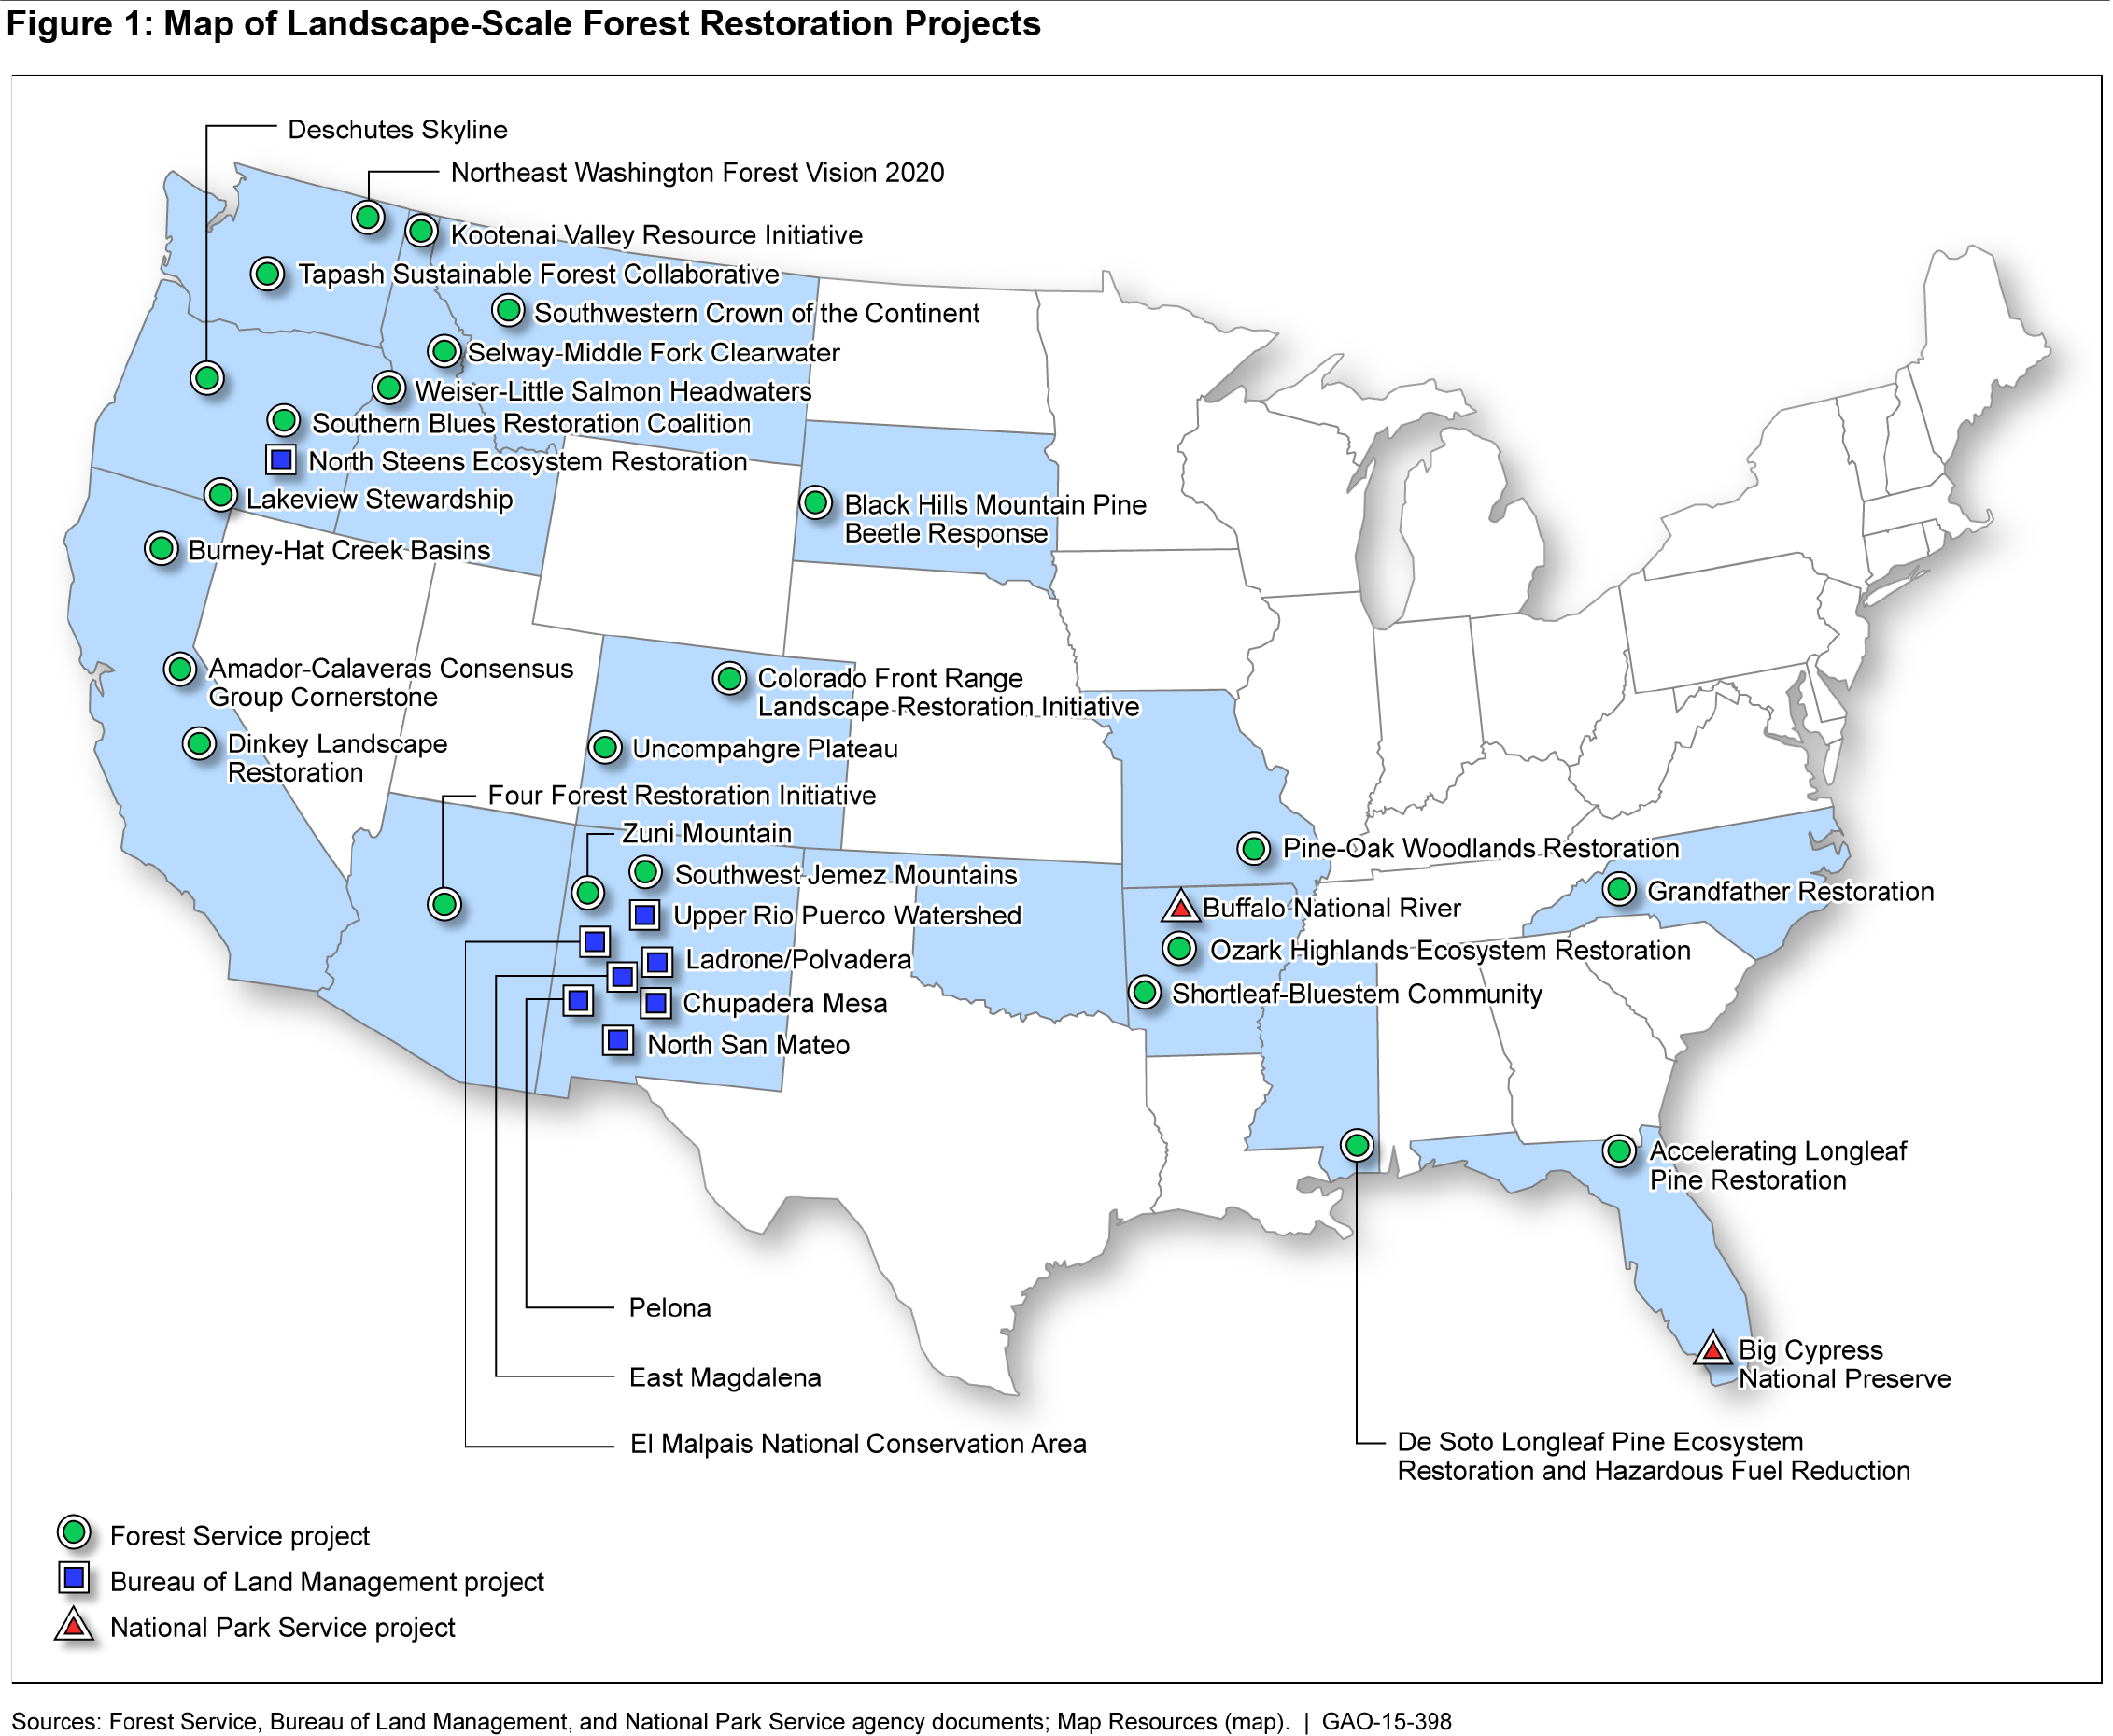 Figure 1: Map of Landscape-Scale Forest Restoration Projects